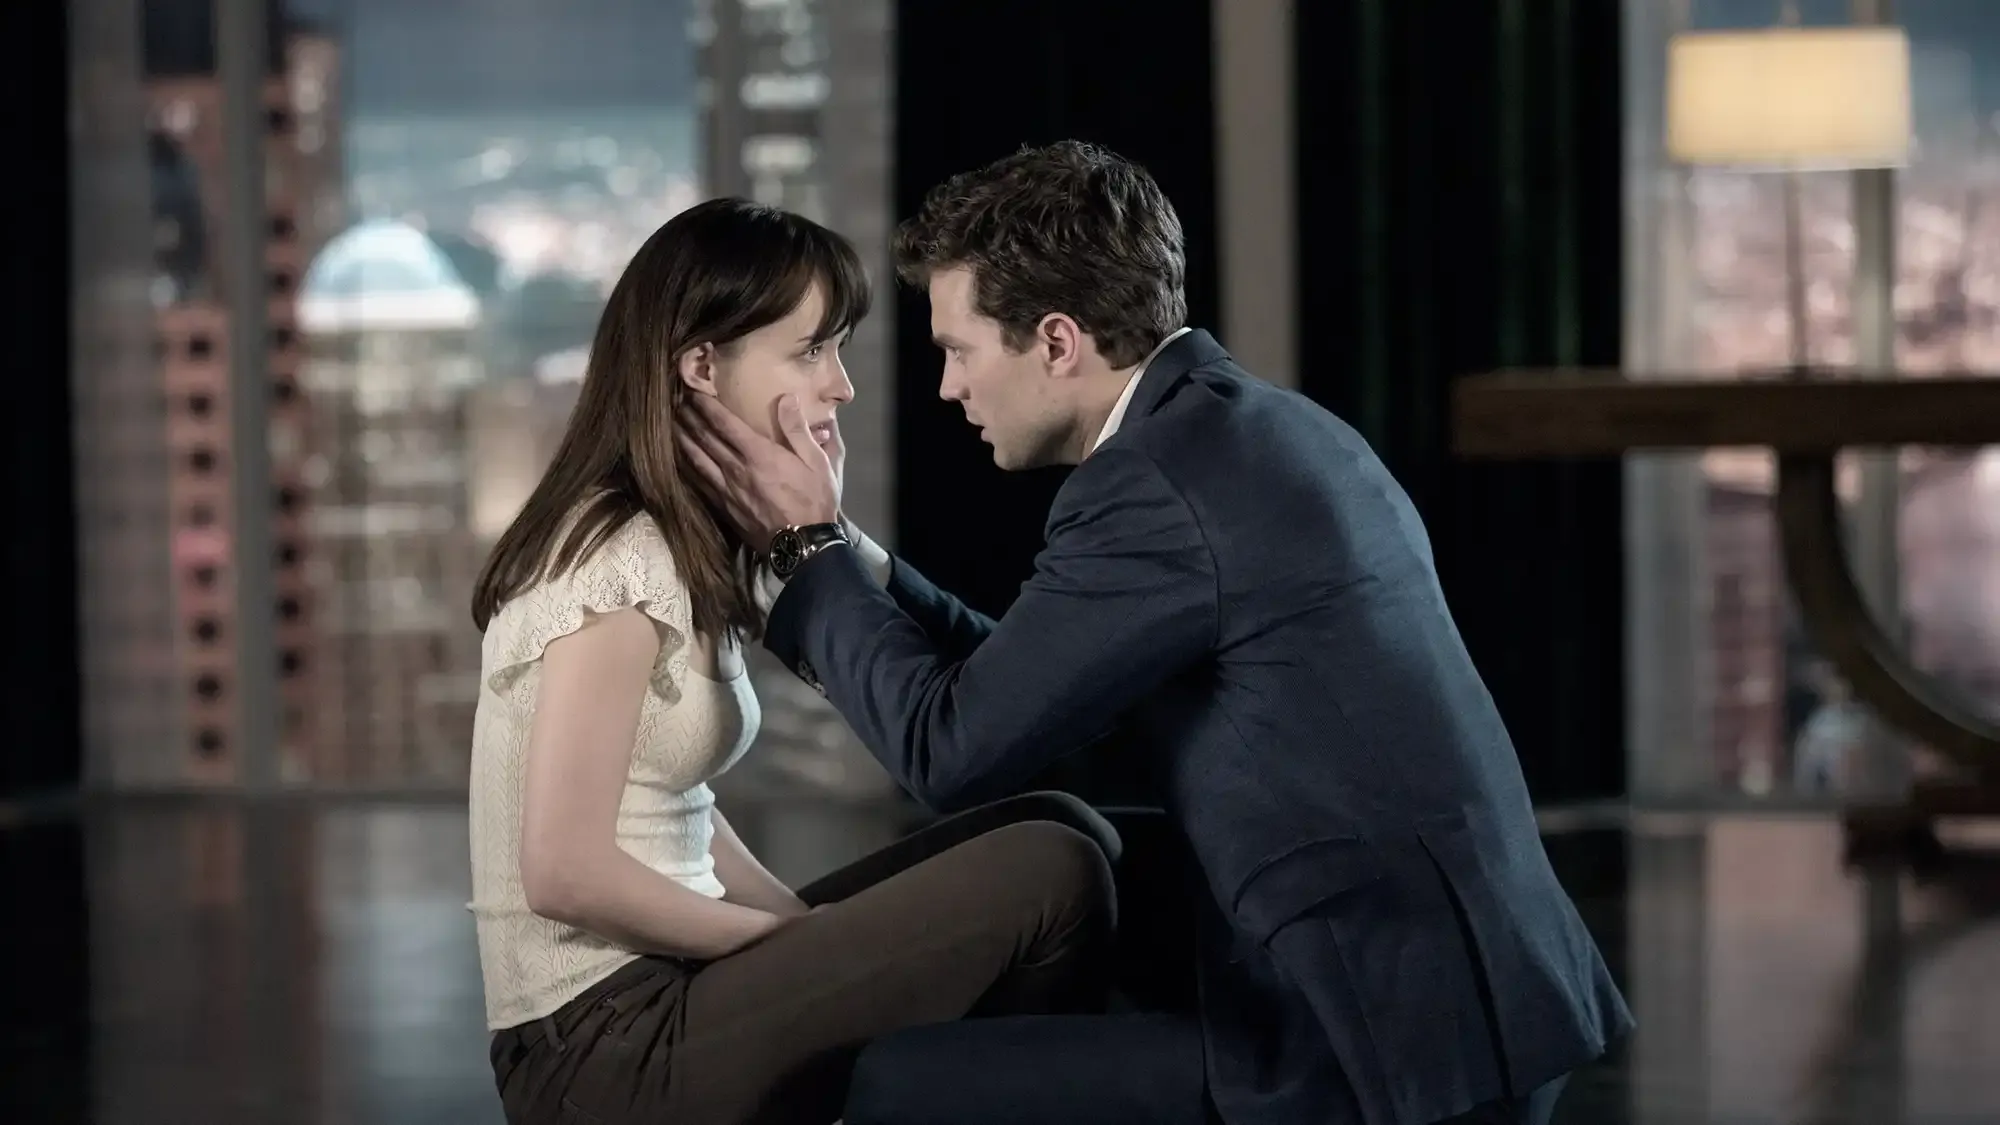 Fifty Shades of Grey movie review